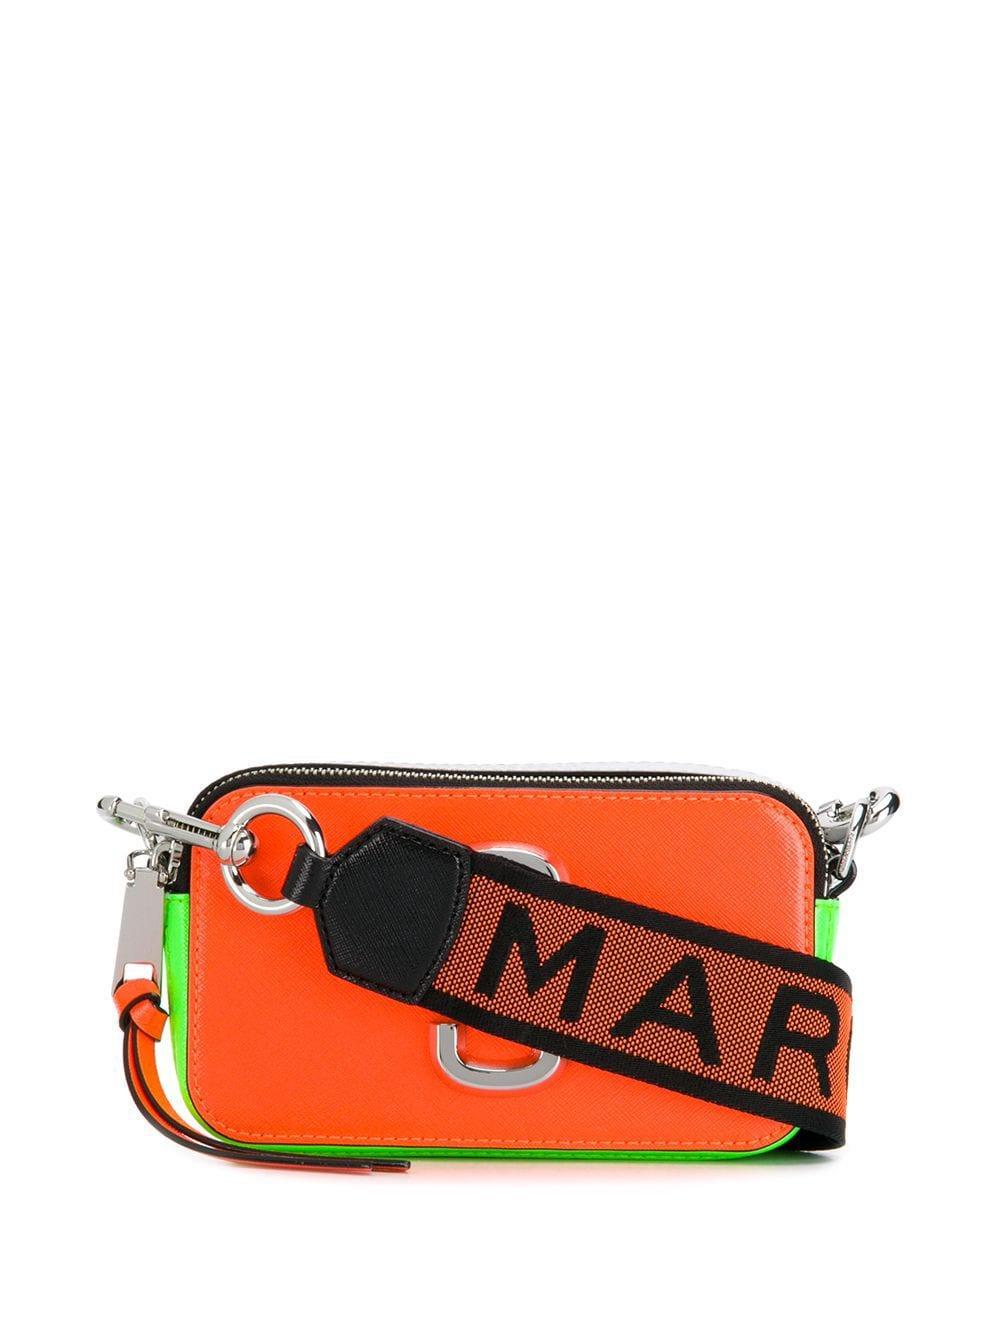 Marc Jacobs Leather The Snapshot Camera Bag in Orange - Lyst